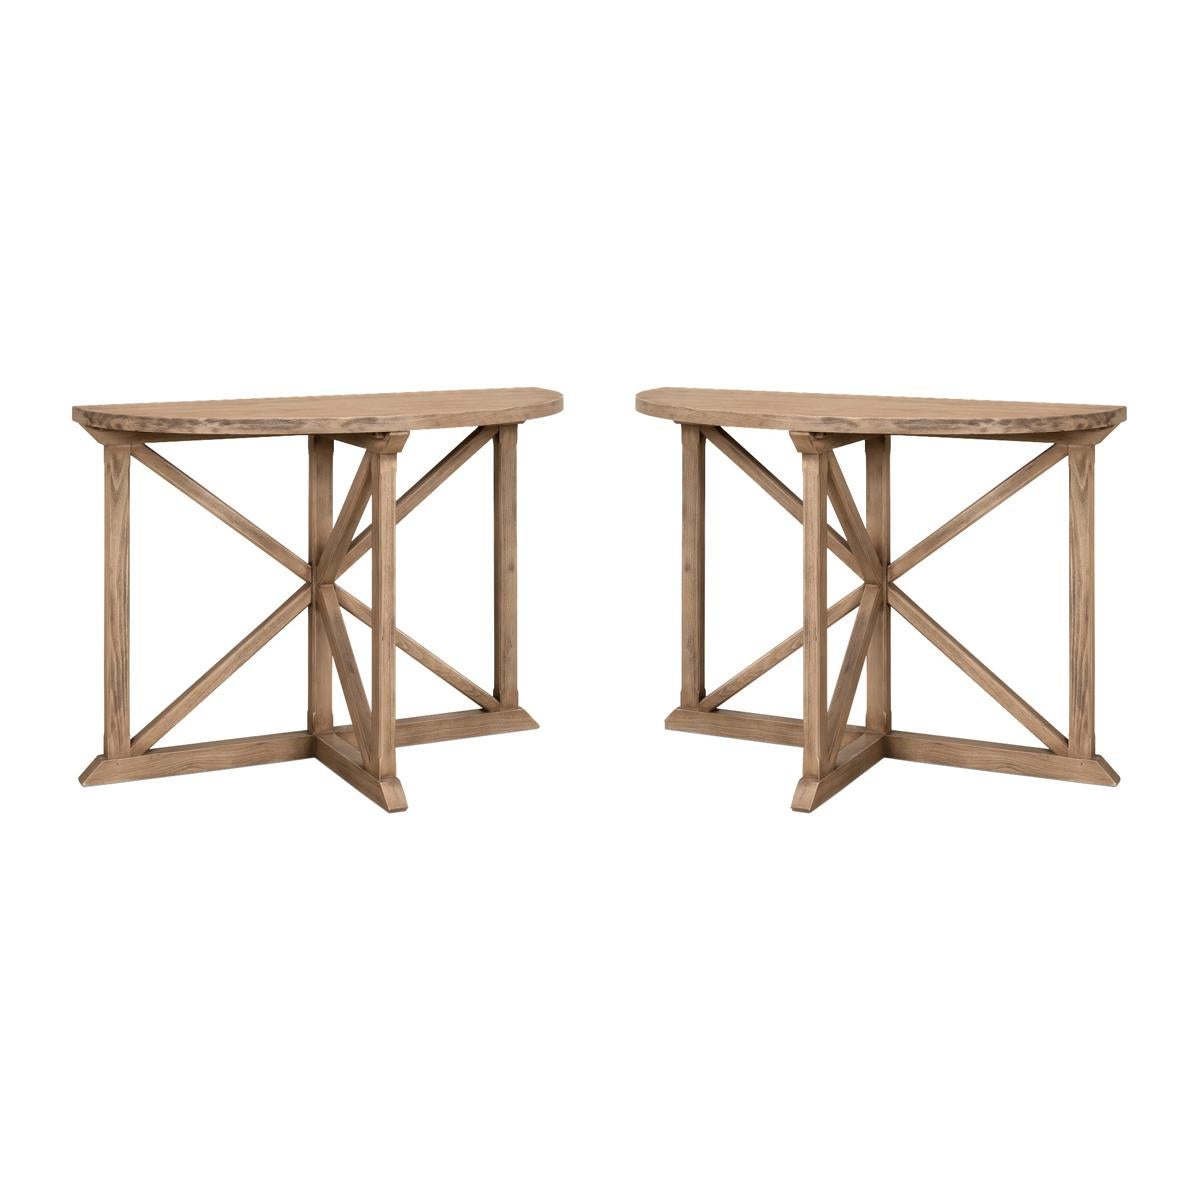 The Vineyard demilune console table is a stunning piece that brings a touch of nature into your home. Made from pine, it has a natural and rustic look that will instantly warm up any space. The flaky pine finish gives it a one-of-a-kind texture and